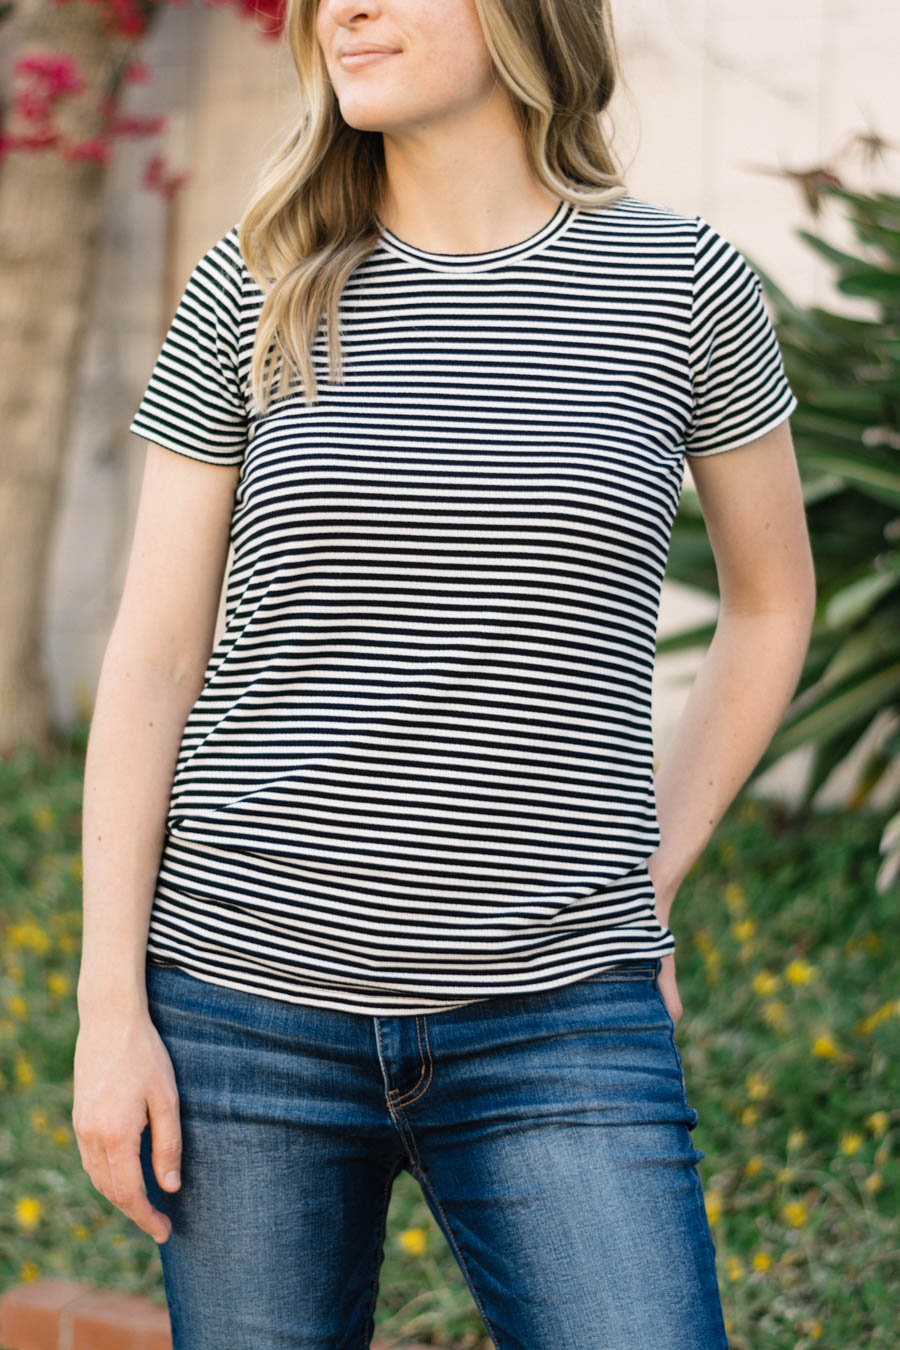 My 3 Favorite Knit T-Shirt Patterns – The Sewing Things Blog